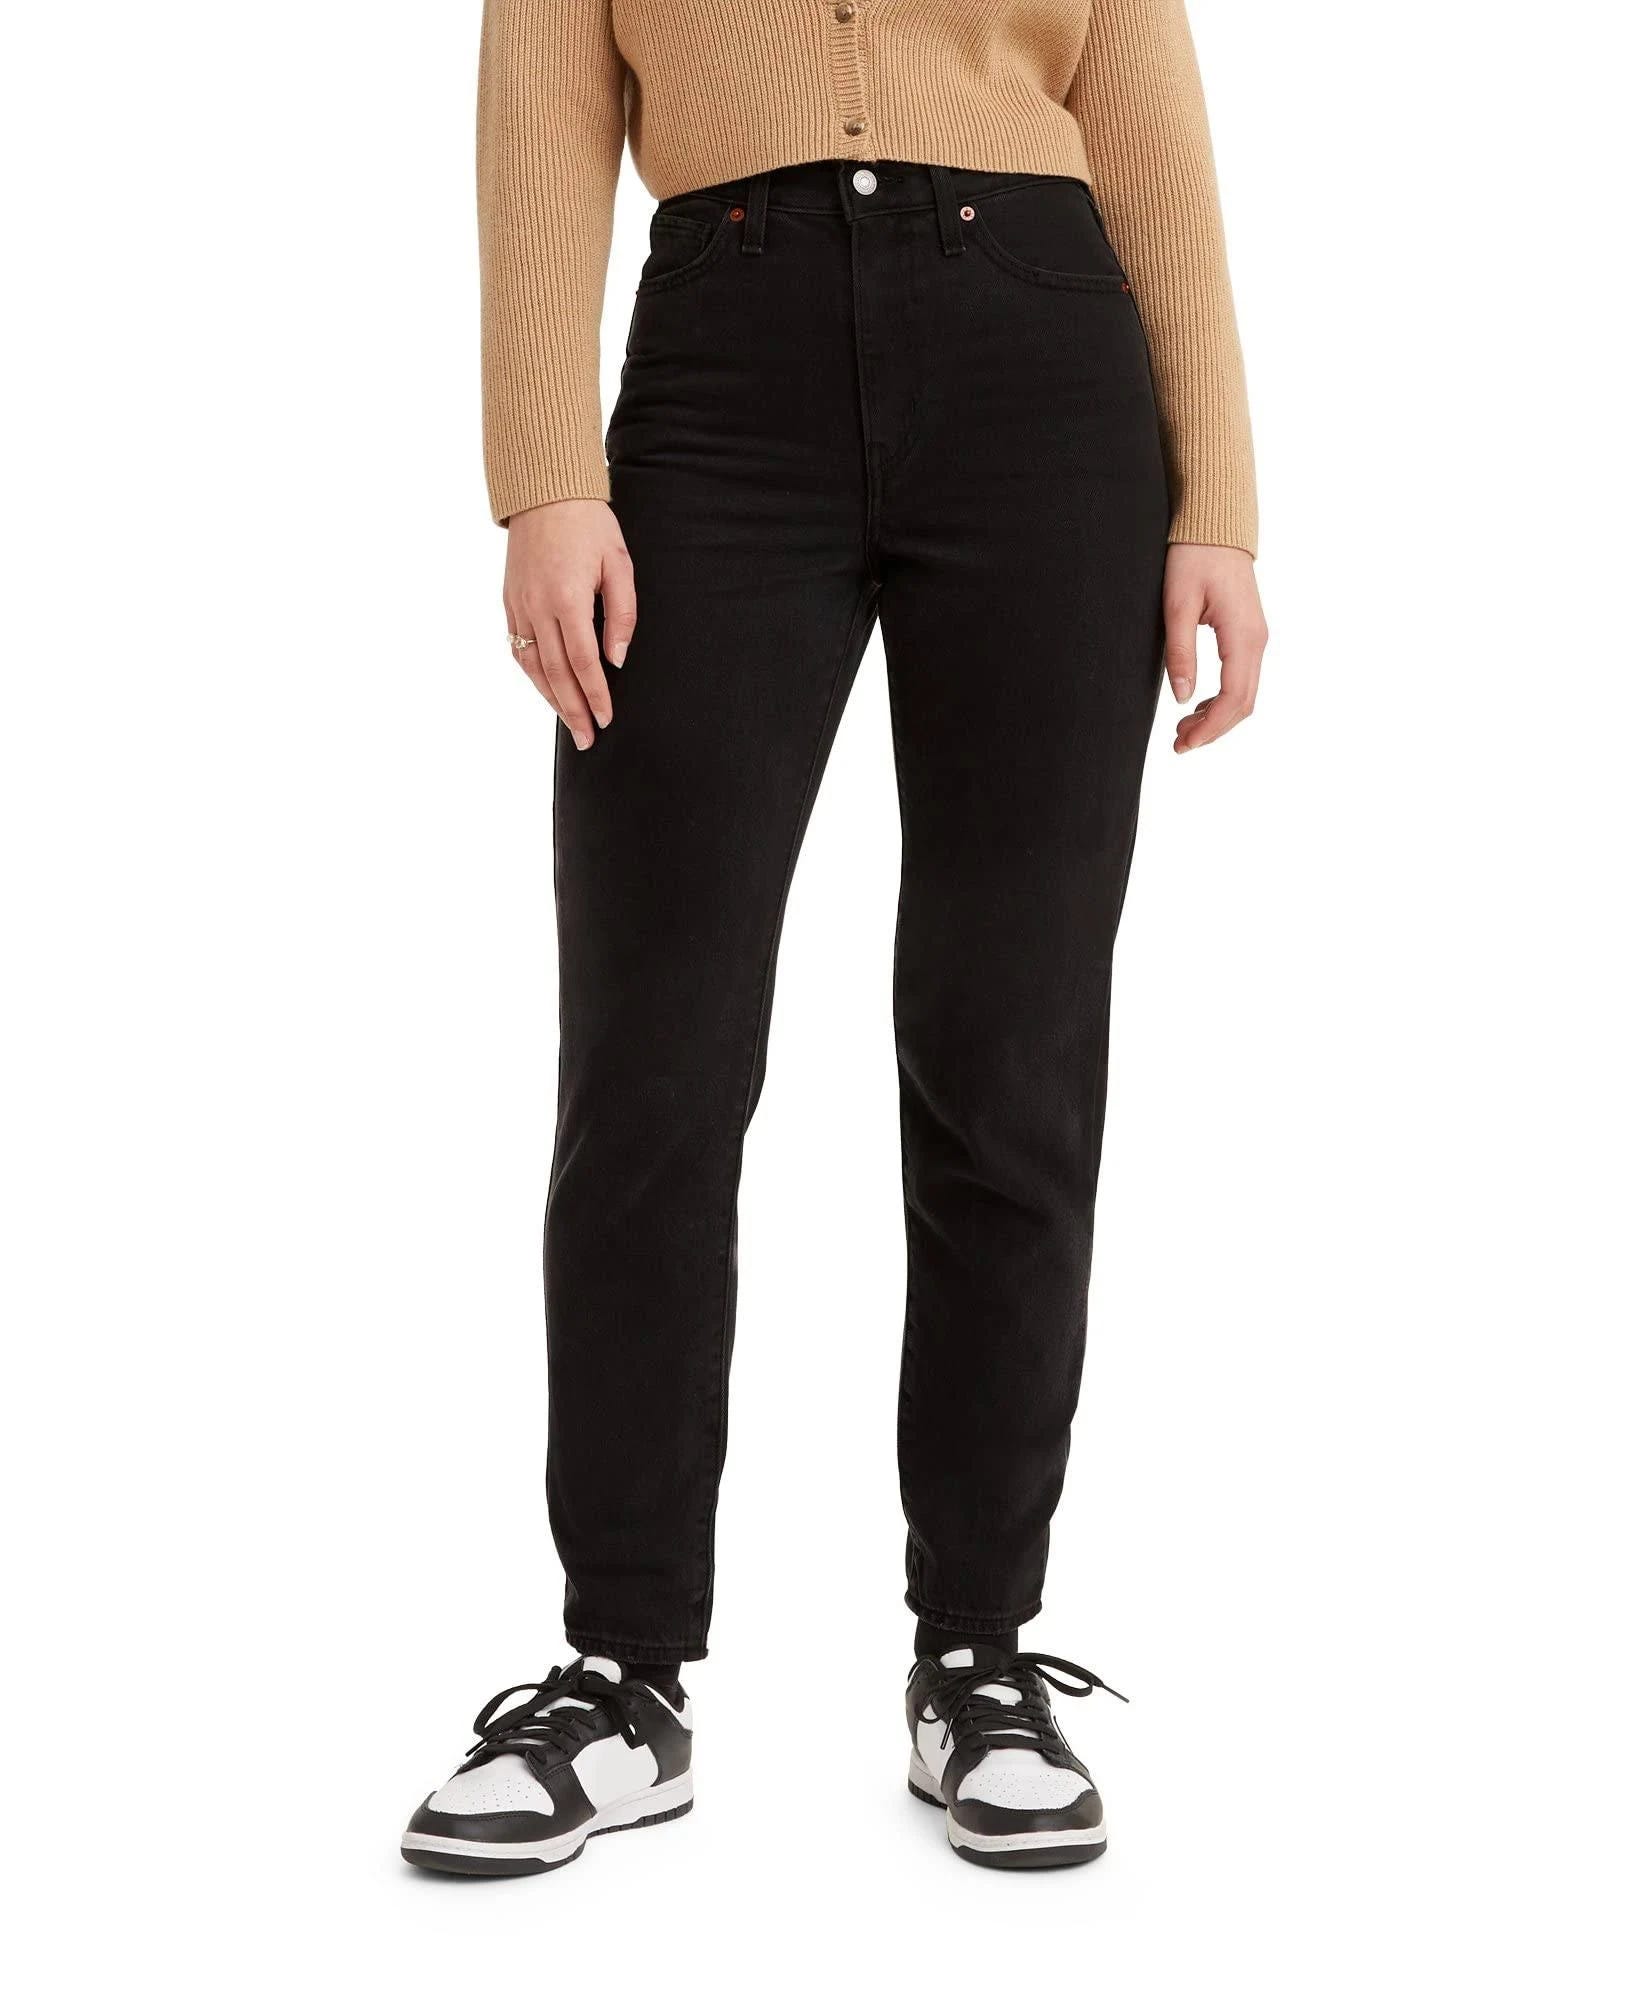 Vintage-Inspired High-Waisted Mom Jeans in Black | Image